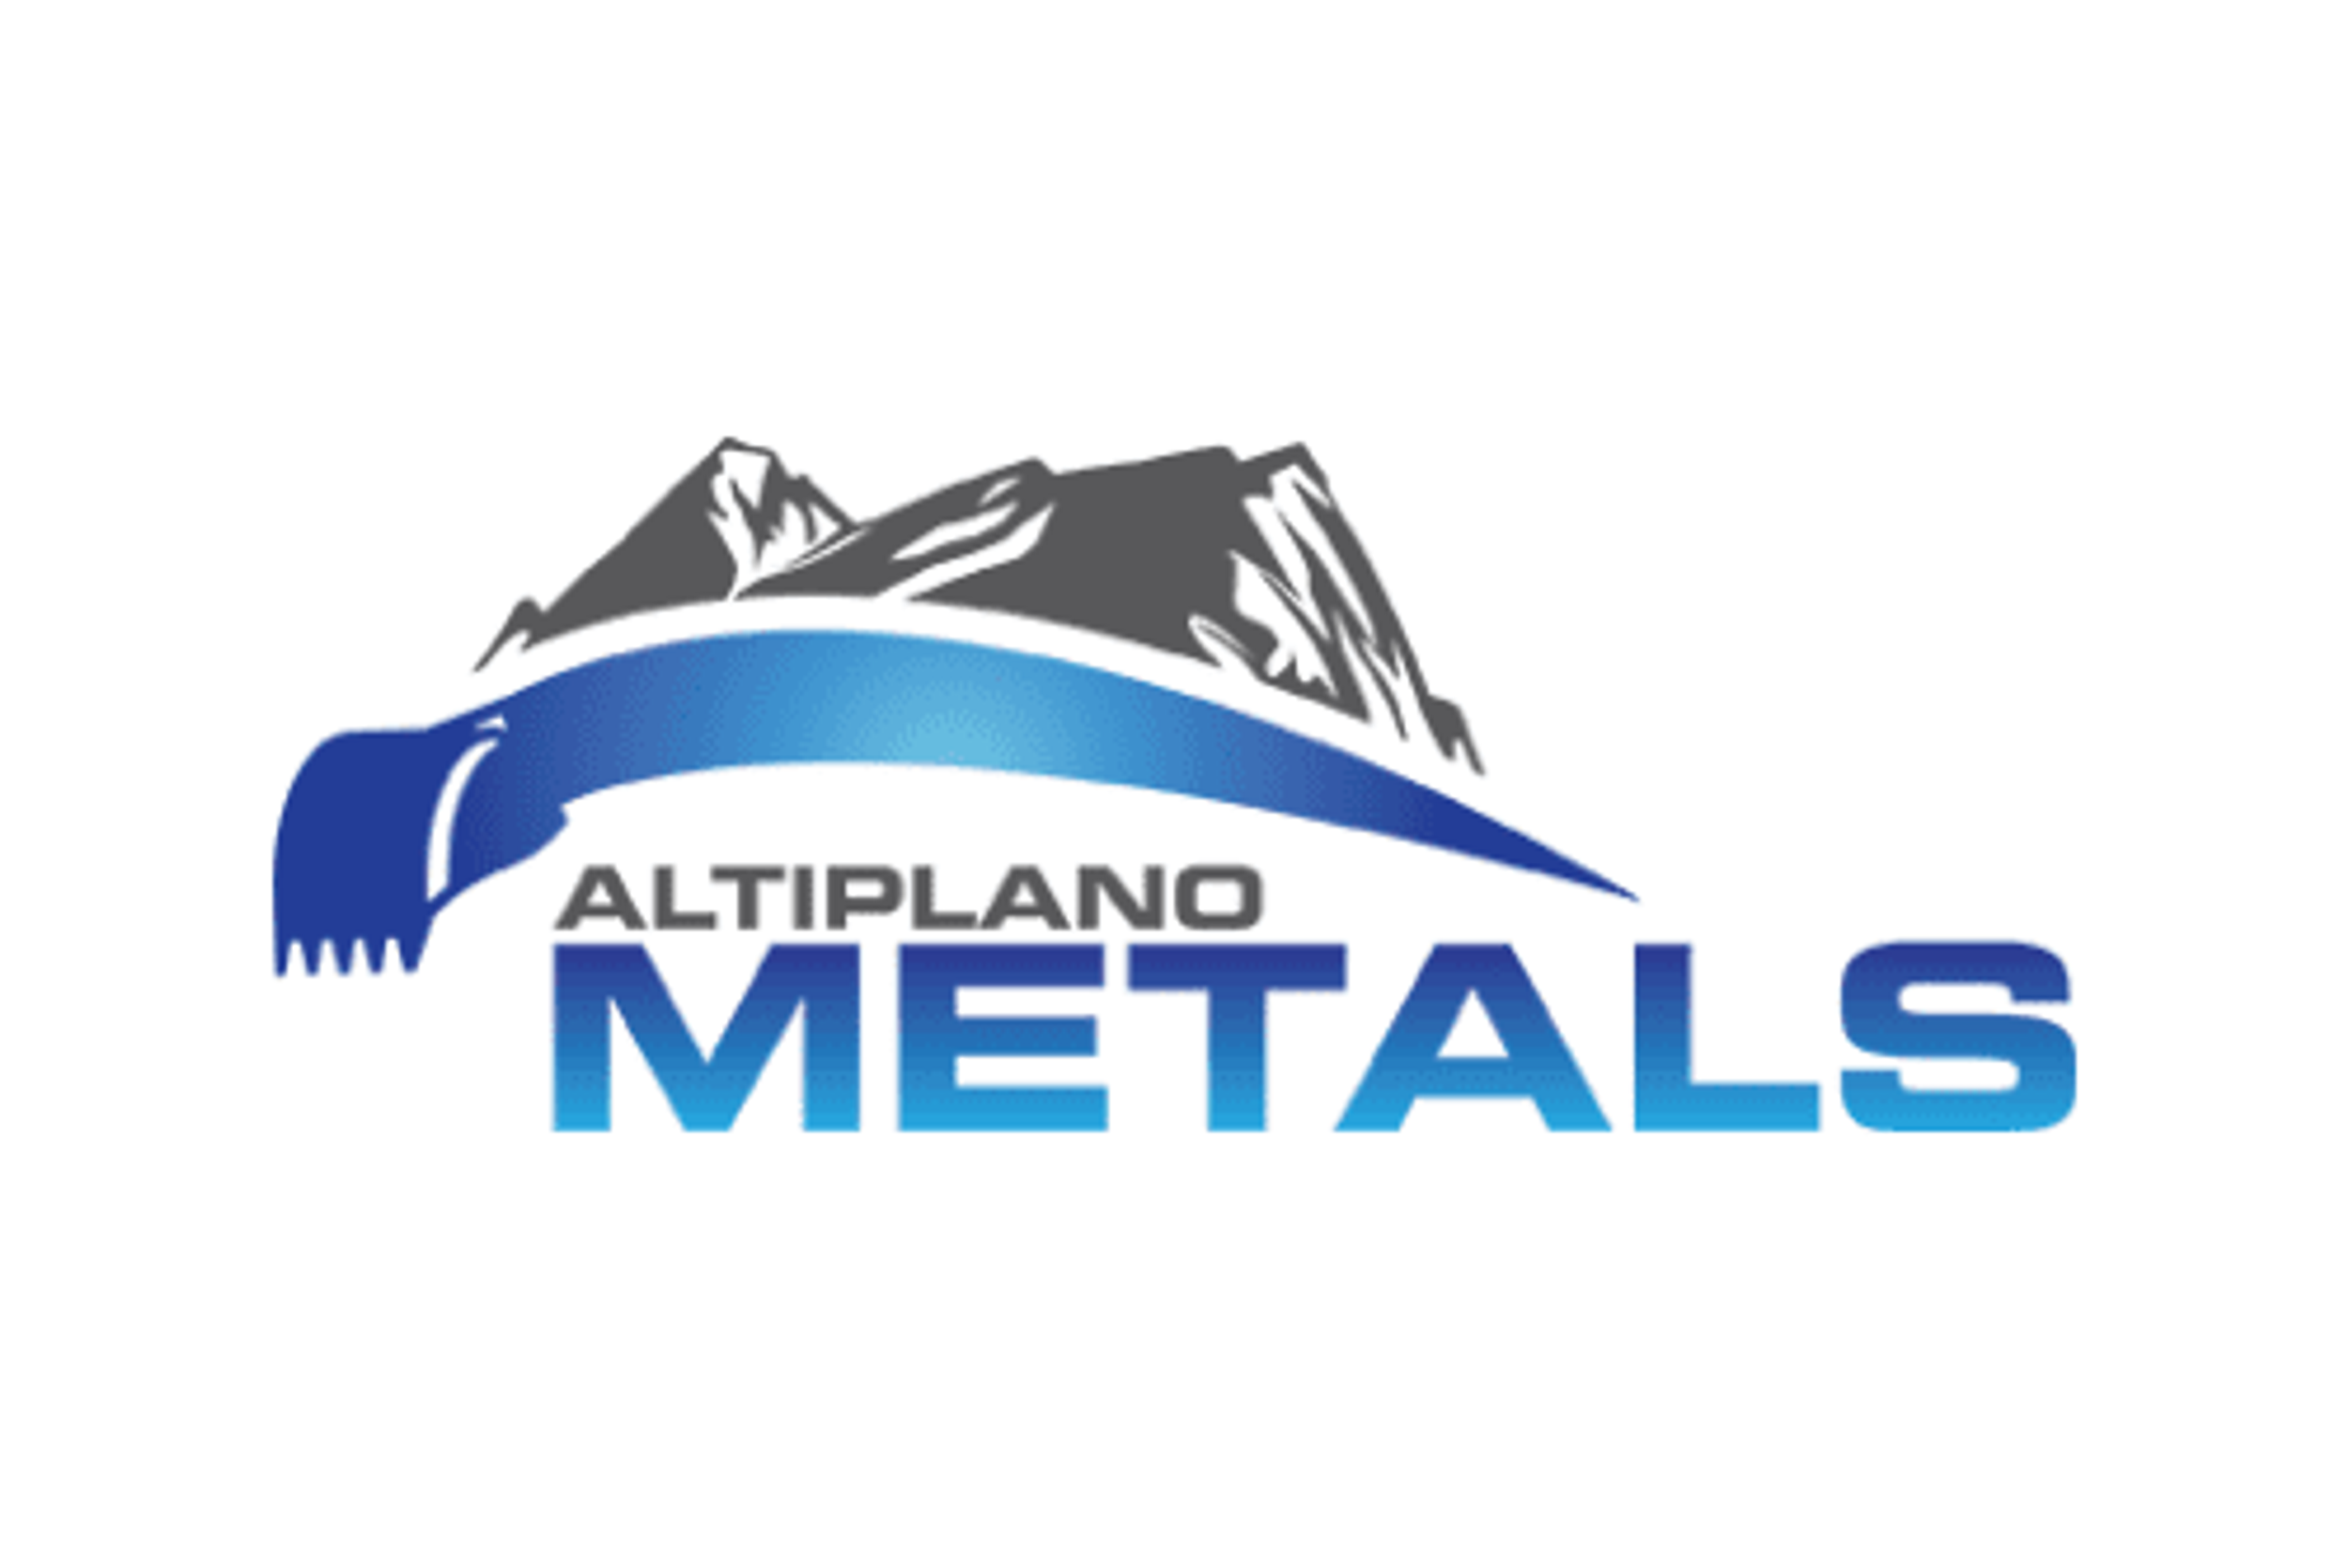 Altiplano Reports November 2021 Results with Improved Grade and Record Income